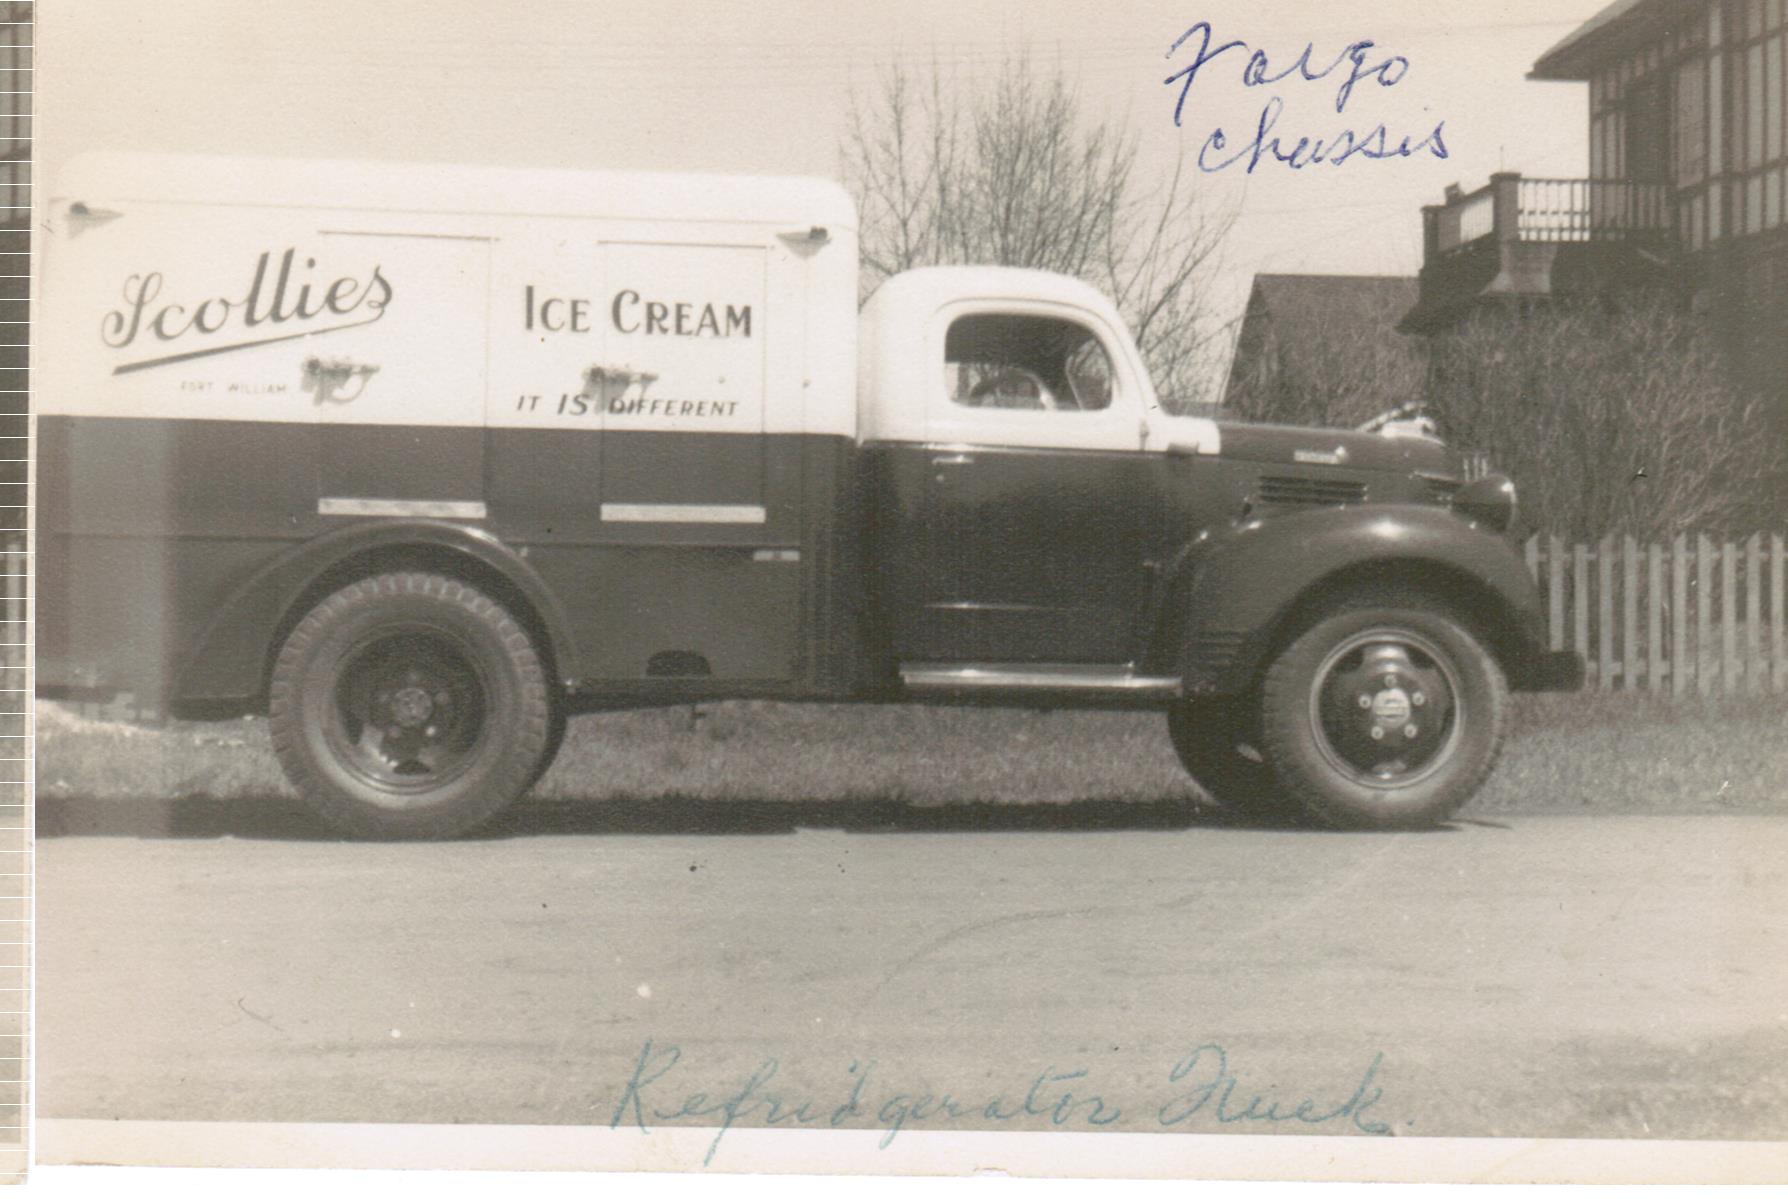 From Cow to Creamix-A Look Back at Scollie’s Dairy